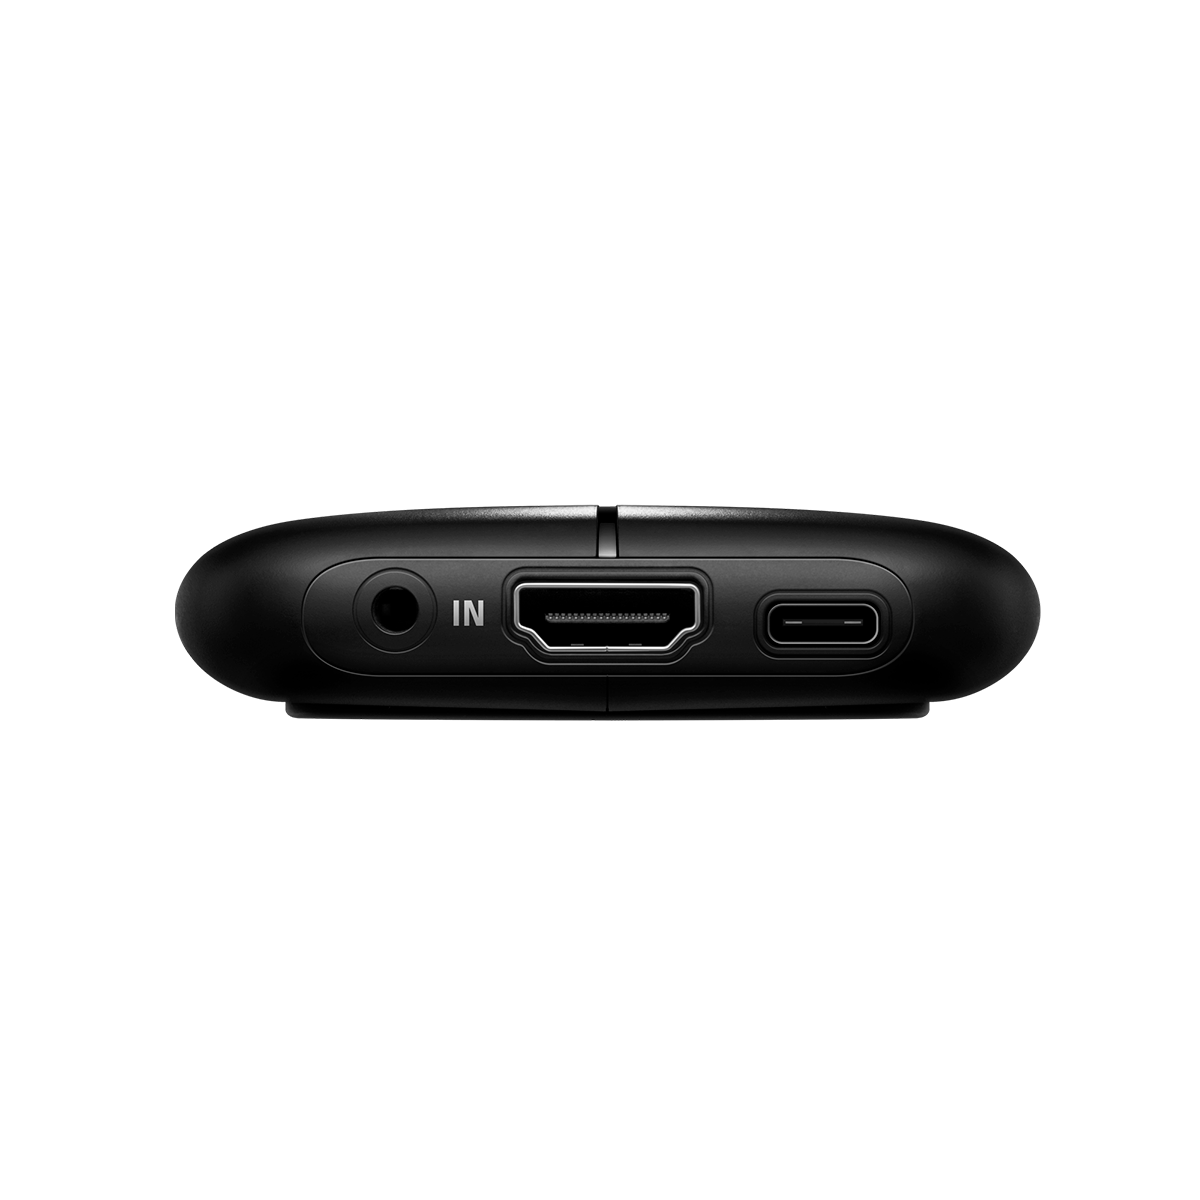 HD60Sdevice image gallery 1